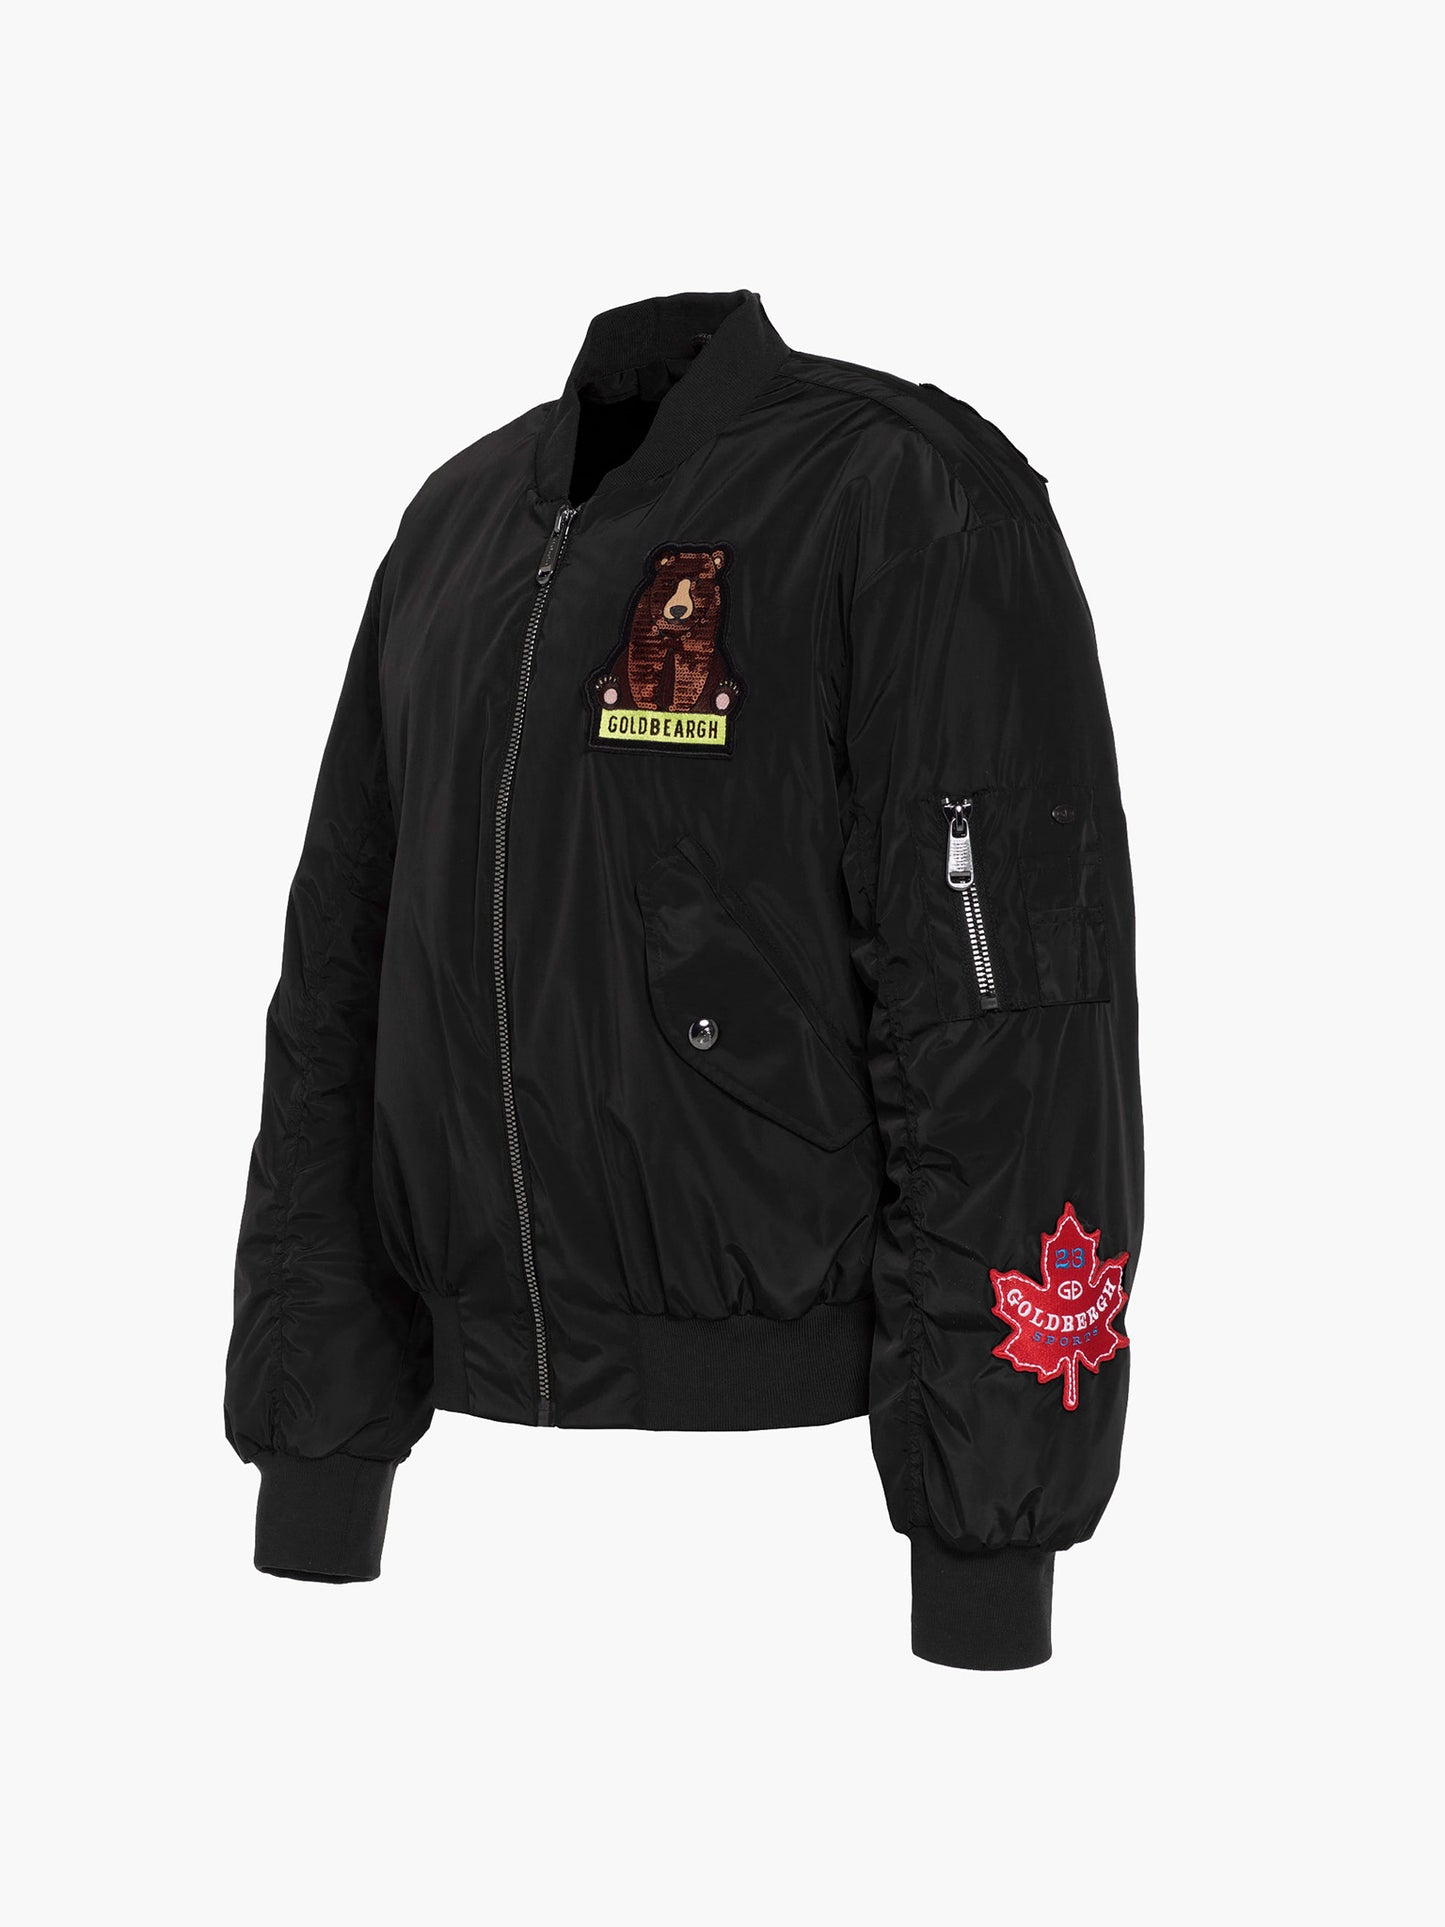 ROOSTER jacket